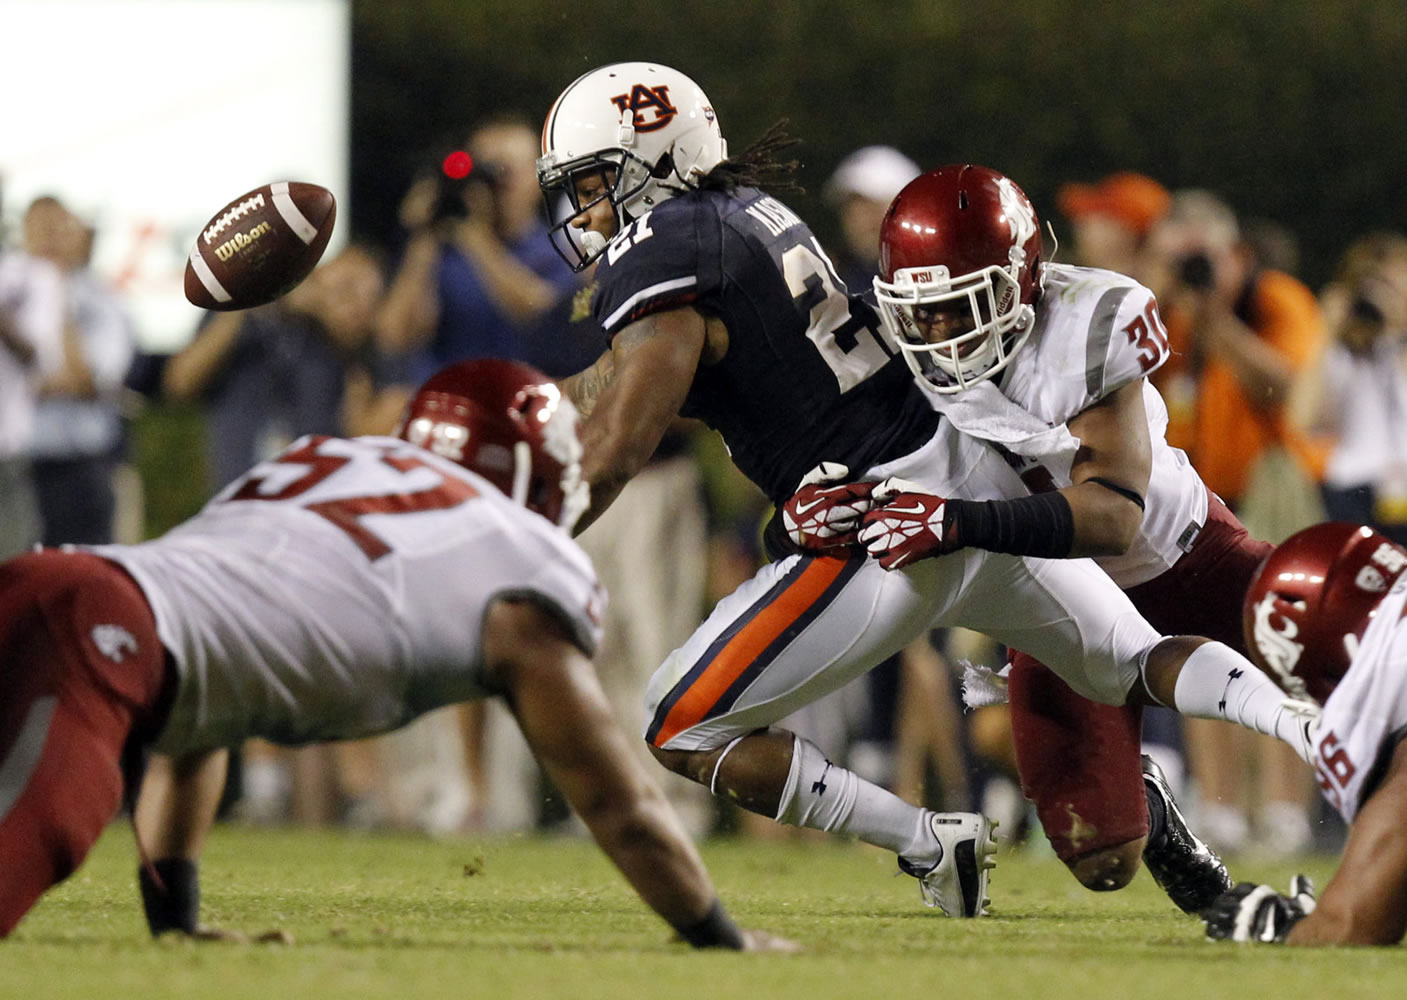 Washington State safety Taylor Taliulu (30) knocks the ball loose from Auburn running back Tre Mason during the second half  Saturday.